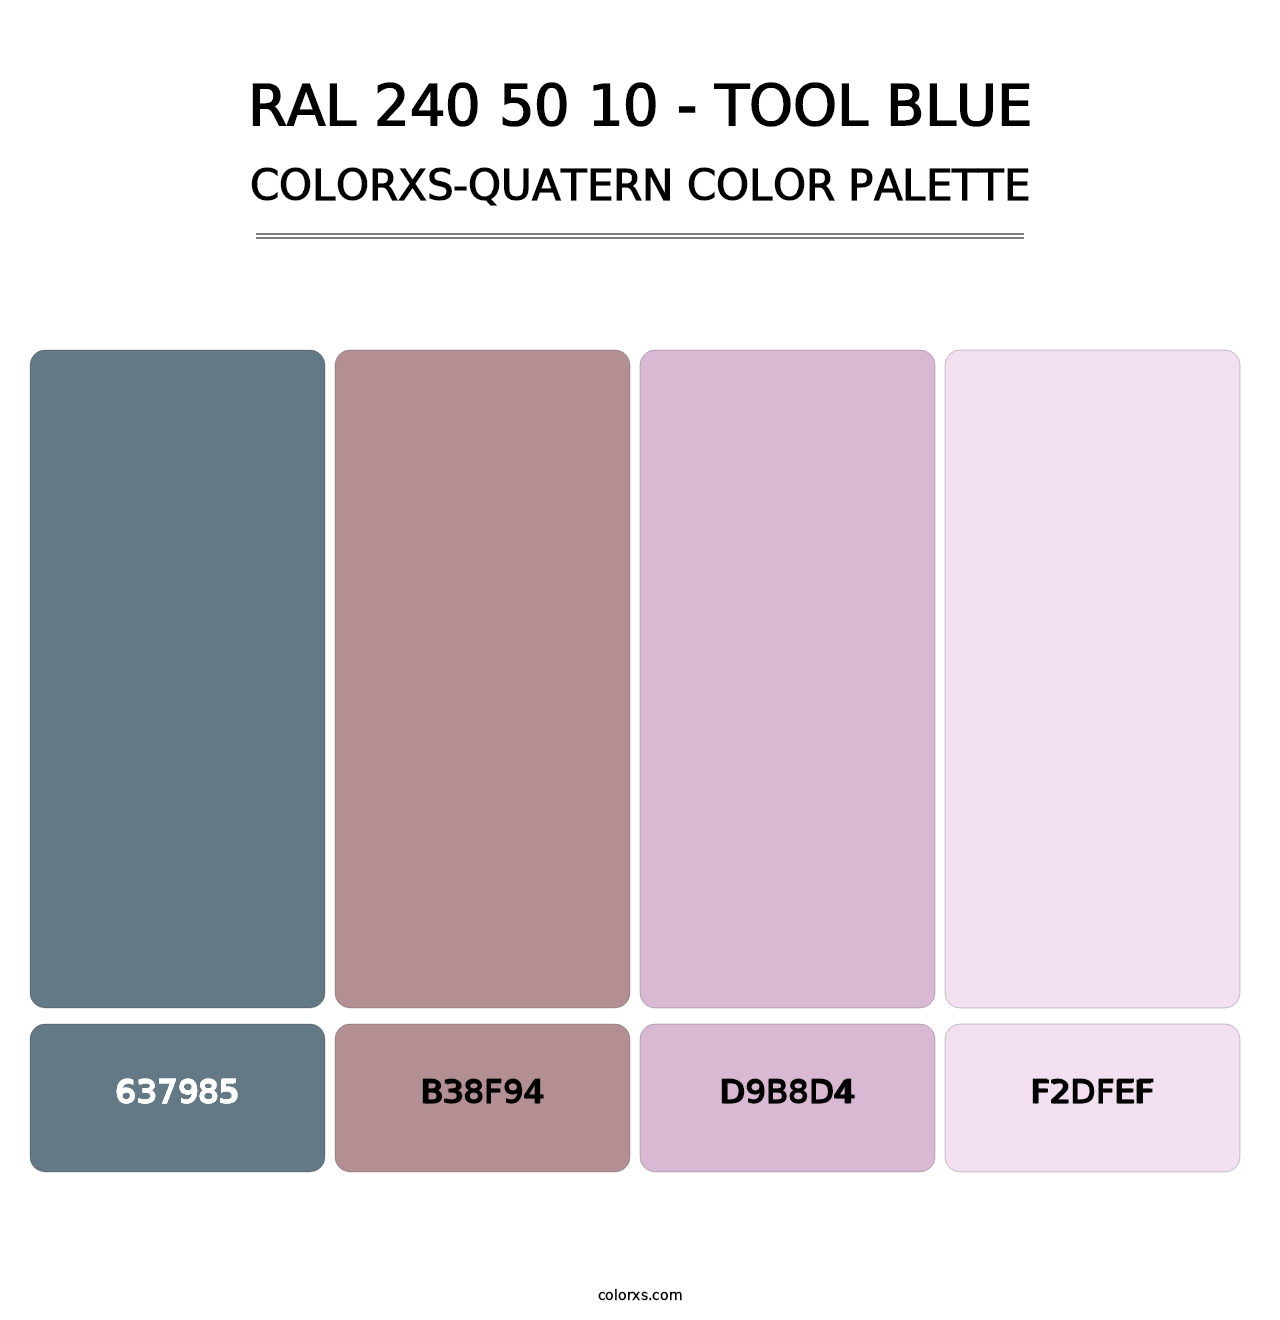 RAL 240 50 10 - Tool Blue - Colorxs Quatern Palette